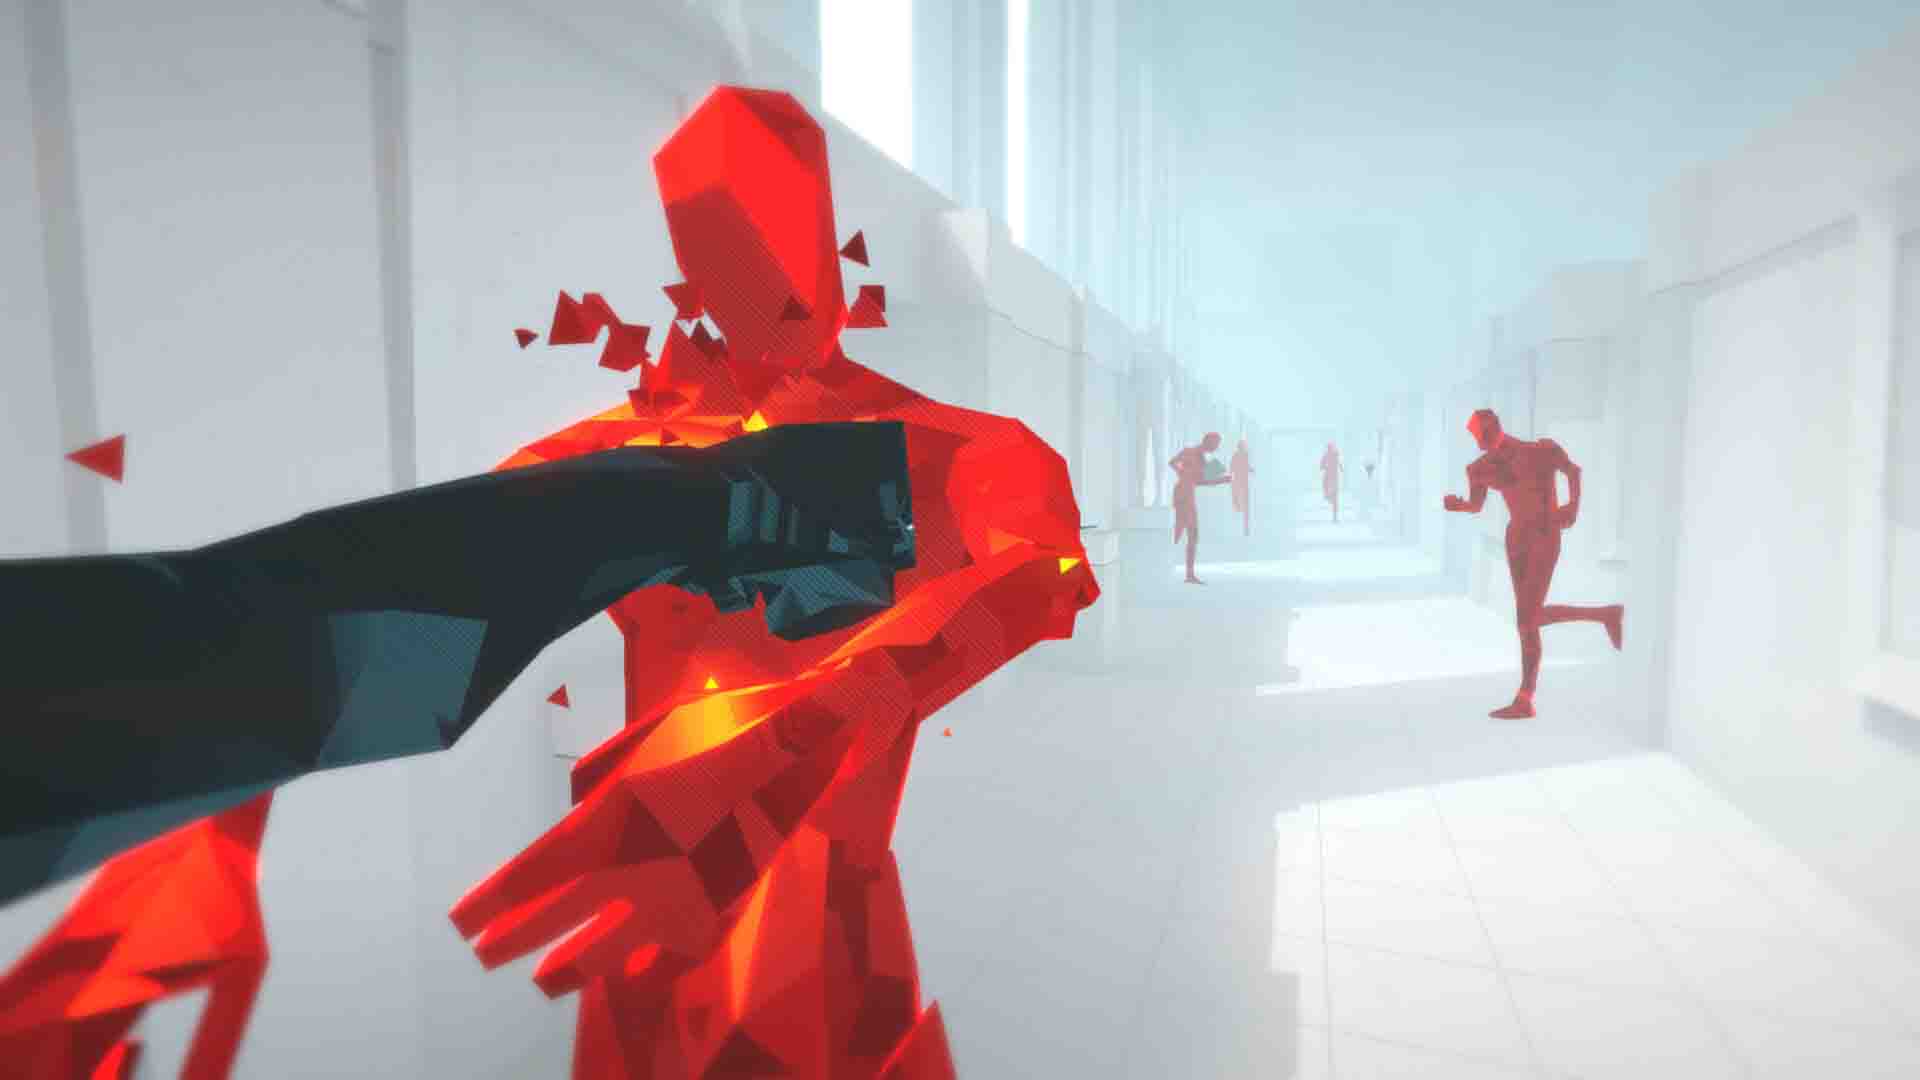 SUPERHOT System Requirements for PC Games minimum, recommended specifications for Windows, CPU, OS, Processor, RAM Memory, Storage, and GPU.